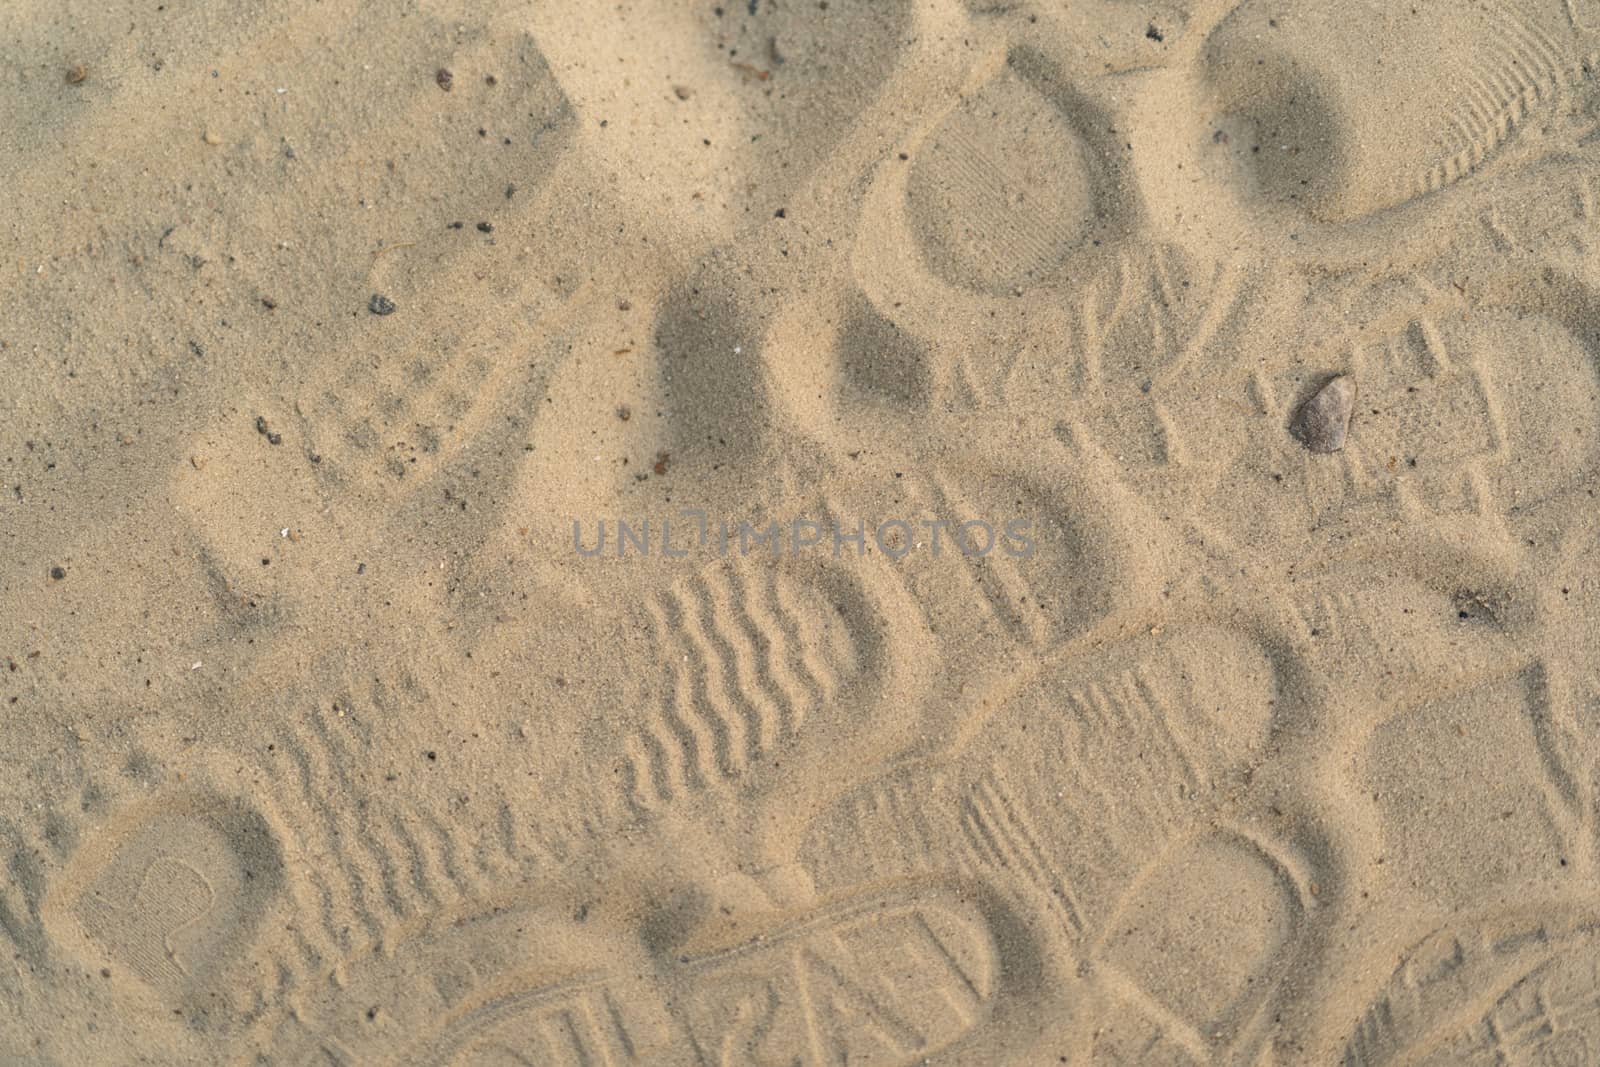 Sand on the beach with footprints and shoes. Many footprints with shoes and without shoes.